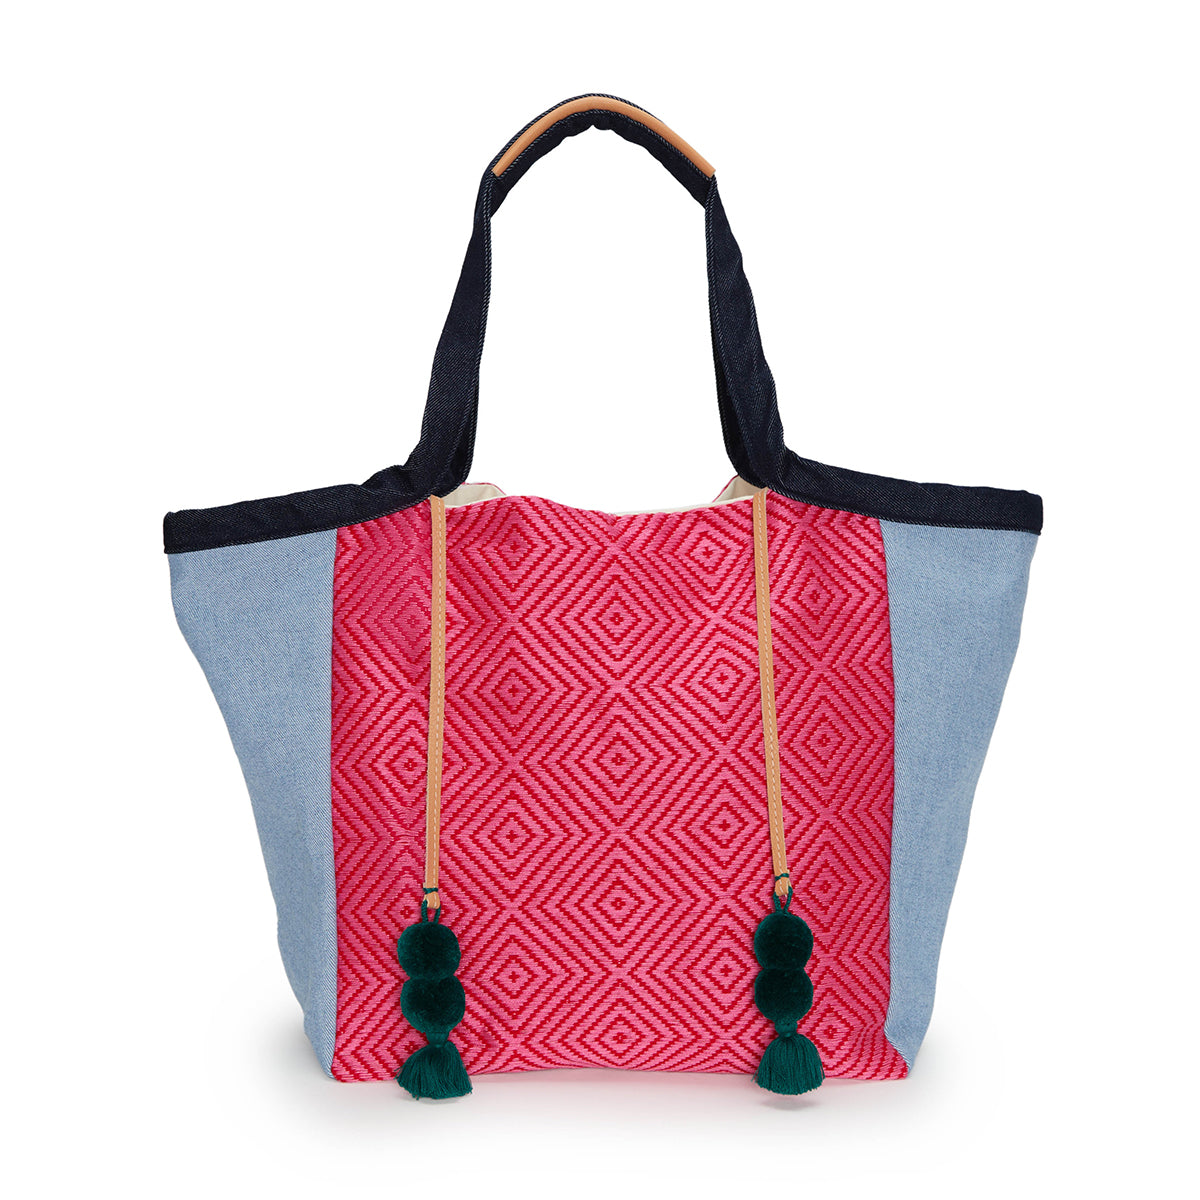 Artisan Rosa Hand Woven Tote in Raspberry. The Rosa has a diamond pink pattern in the center and light wash denim sides. It has dark green pompoms and tassels attached to leather cords. The hands have a dark wash denim fabric and leather detailing.